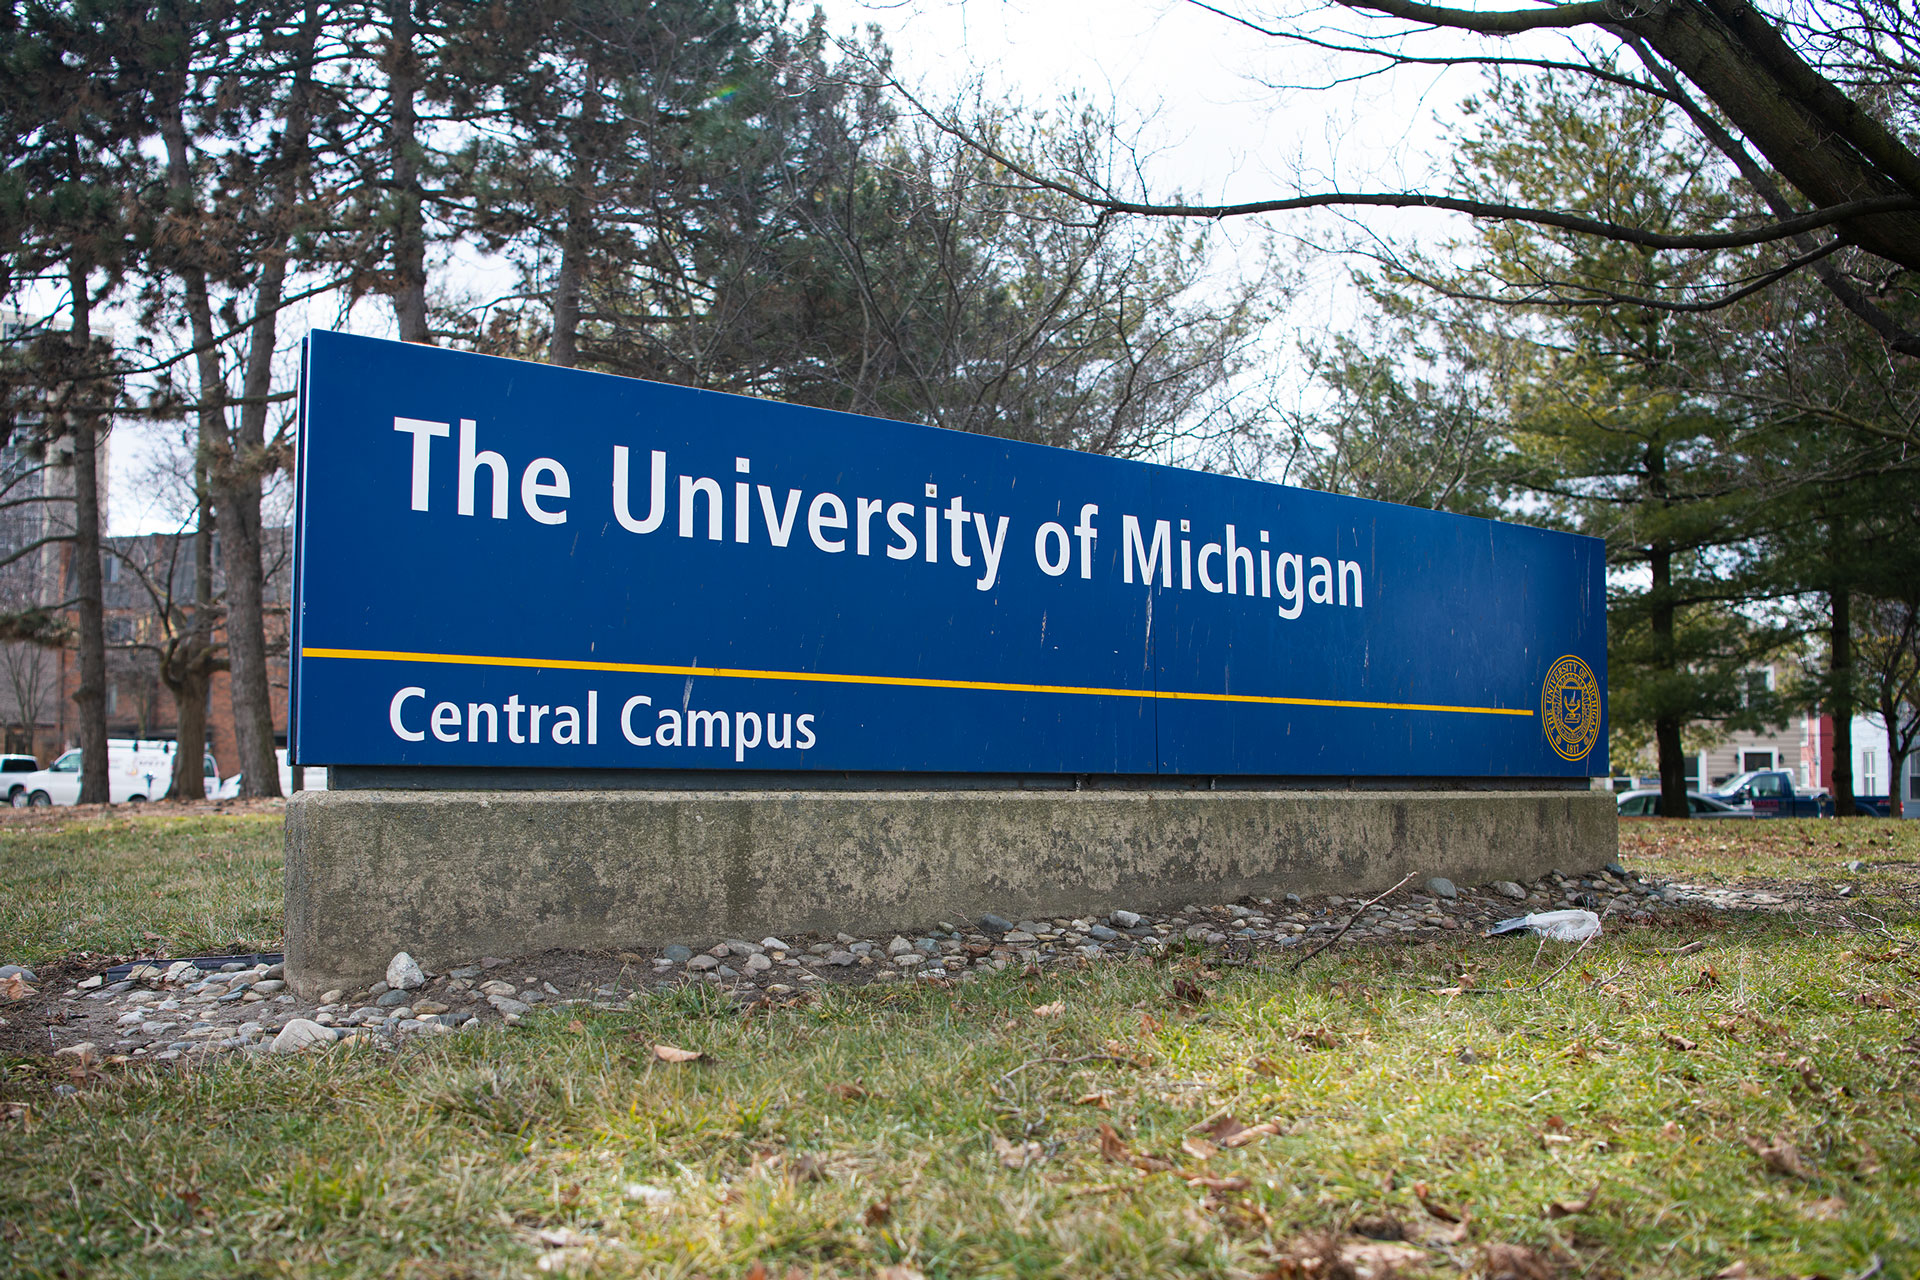 Walter Lasecki, a University of Michigan computer science professor, will resign on Aug. 30 following the publication of a Michigan Daily investigatio